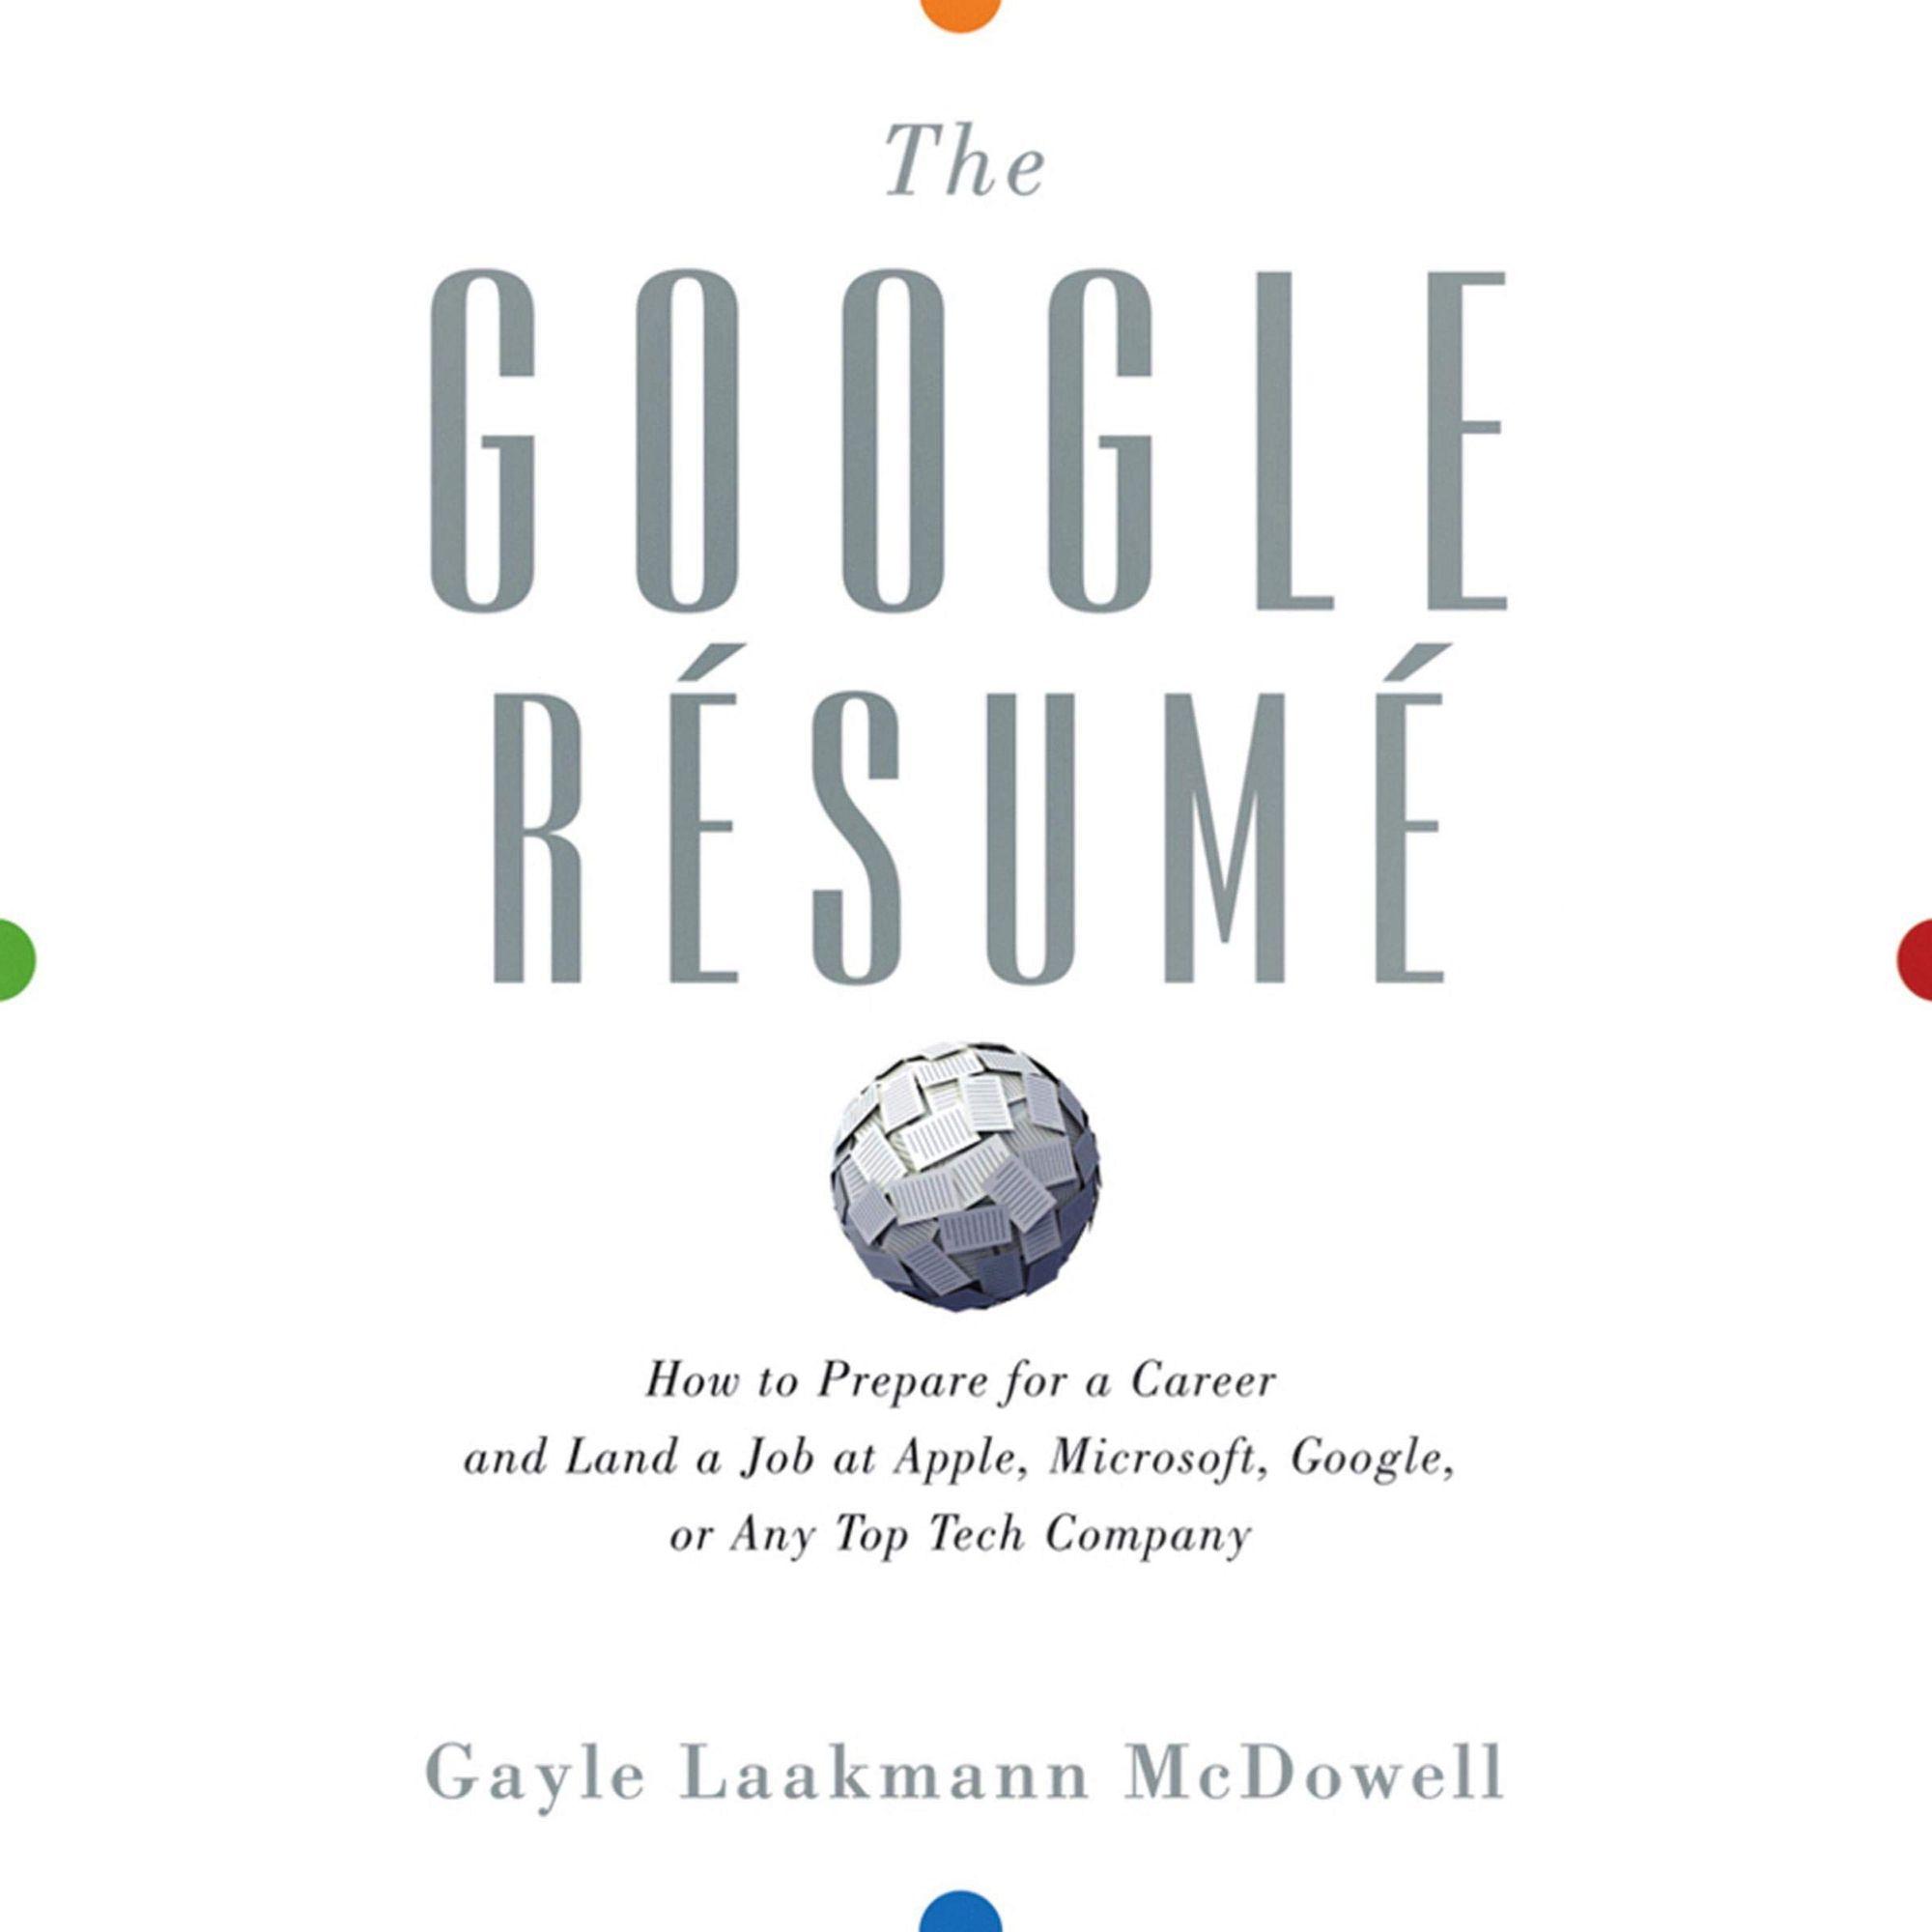 The Google Resume: A Must-Read Even for Non-Tech People